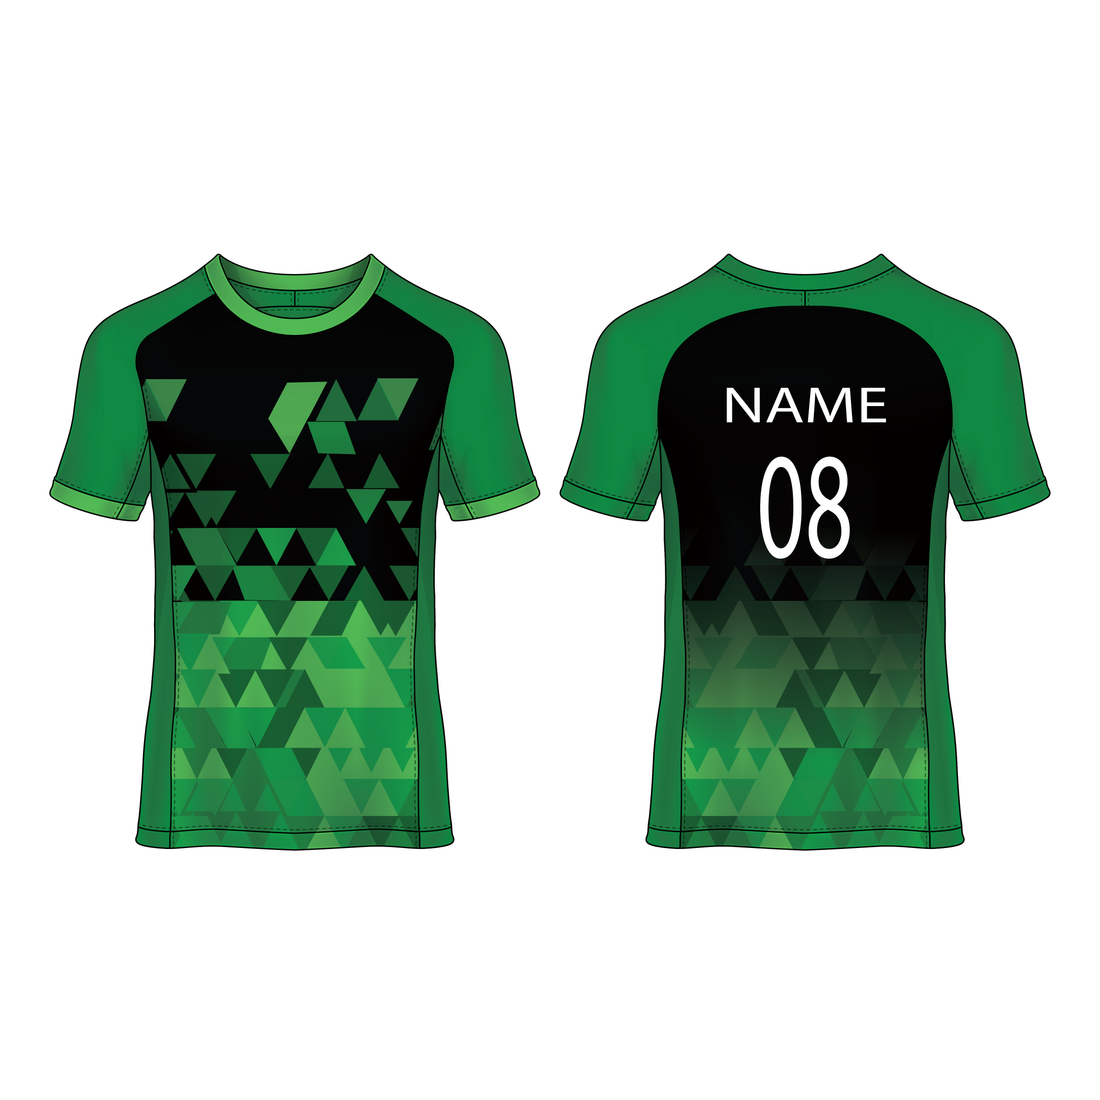 NEXT PRINT All Over Printed Customized Sublimation T-Shirt Unisex Sports Jersey Player Name & Number, Team Name NP50000260